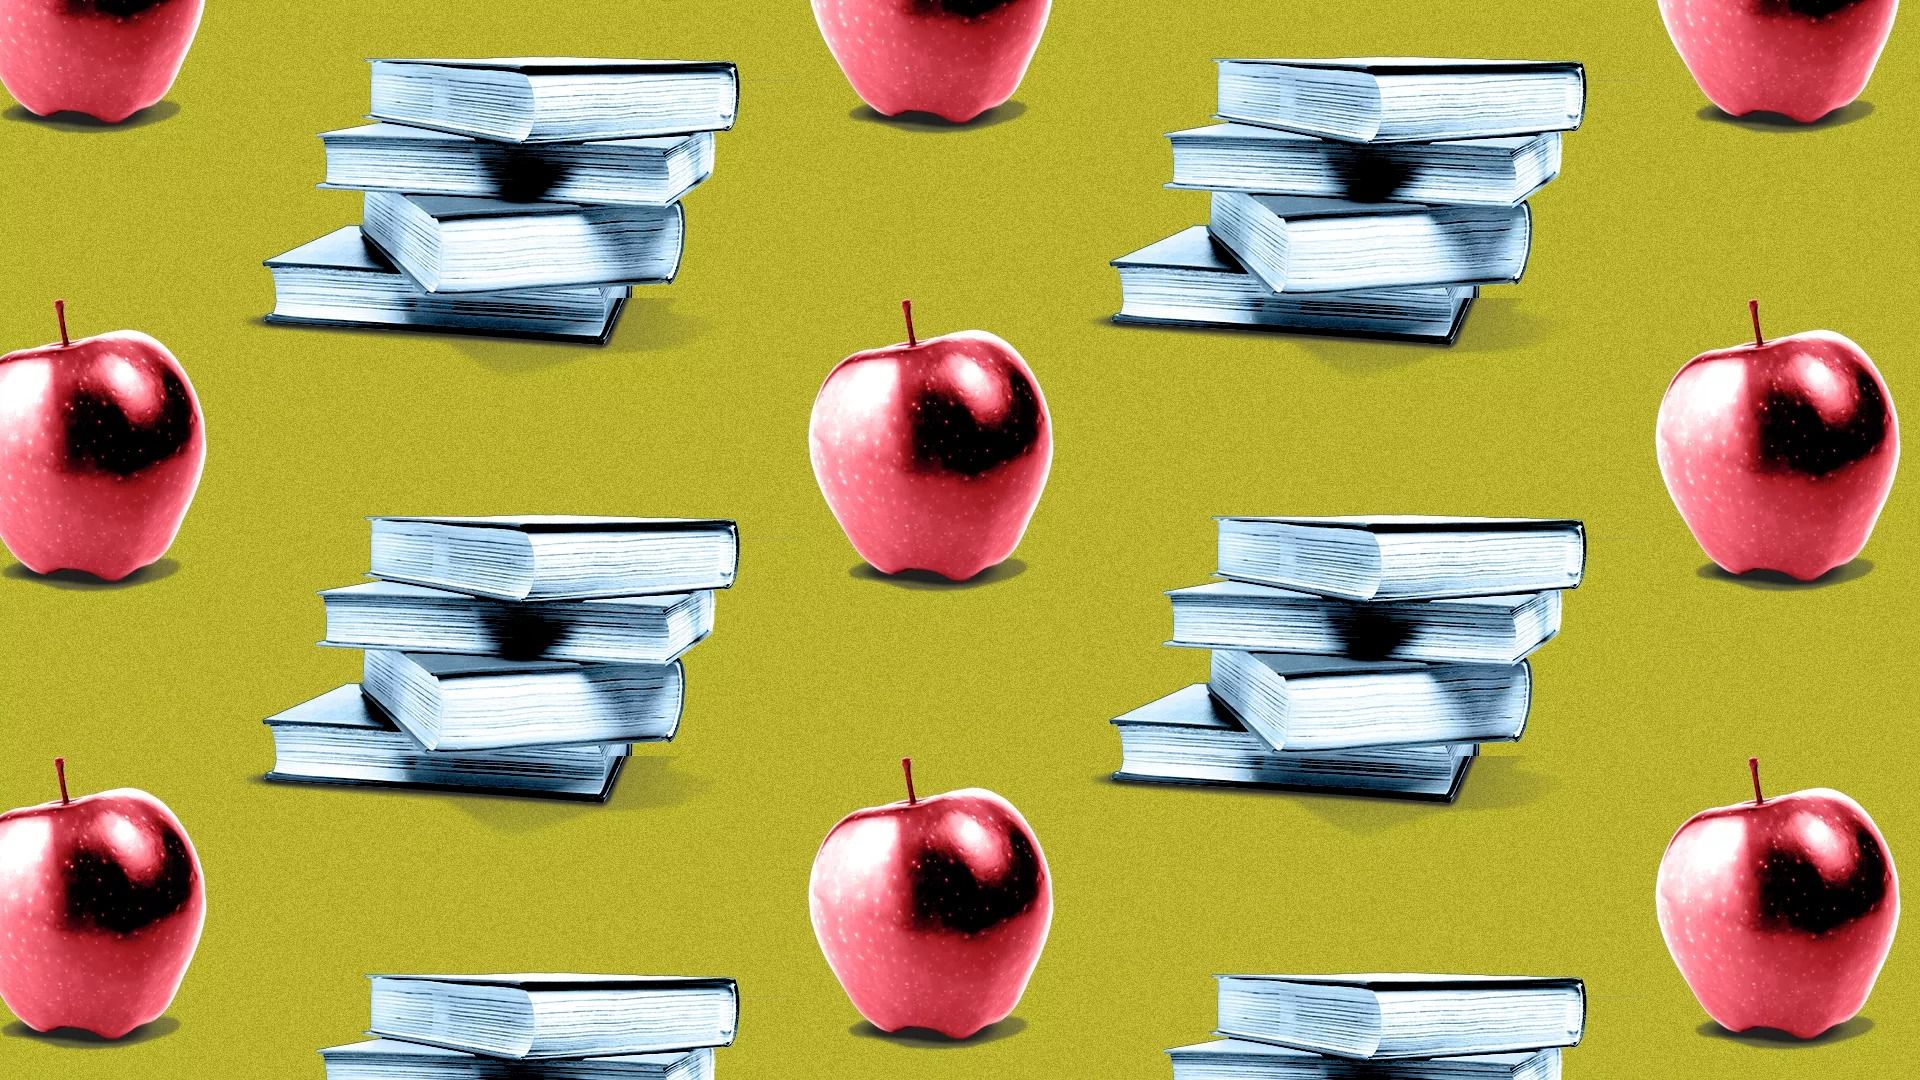 Illustration of a pattern of apples and stacks of textbooks.